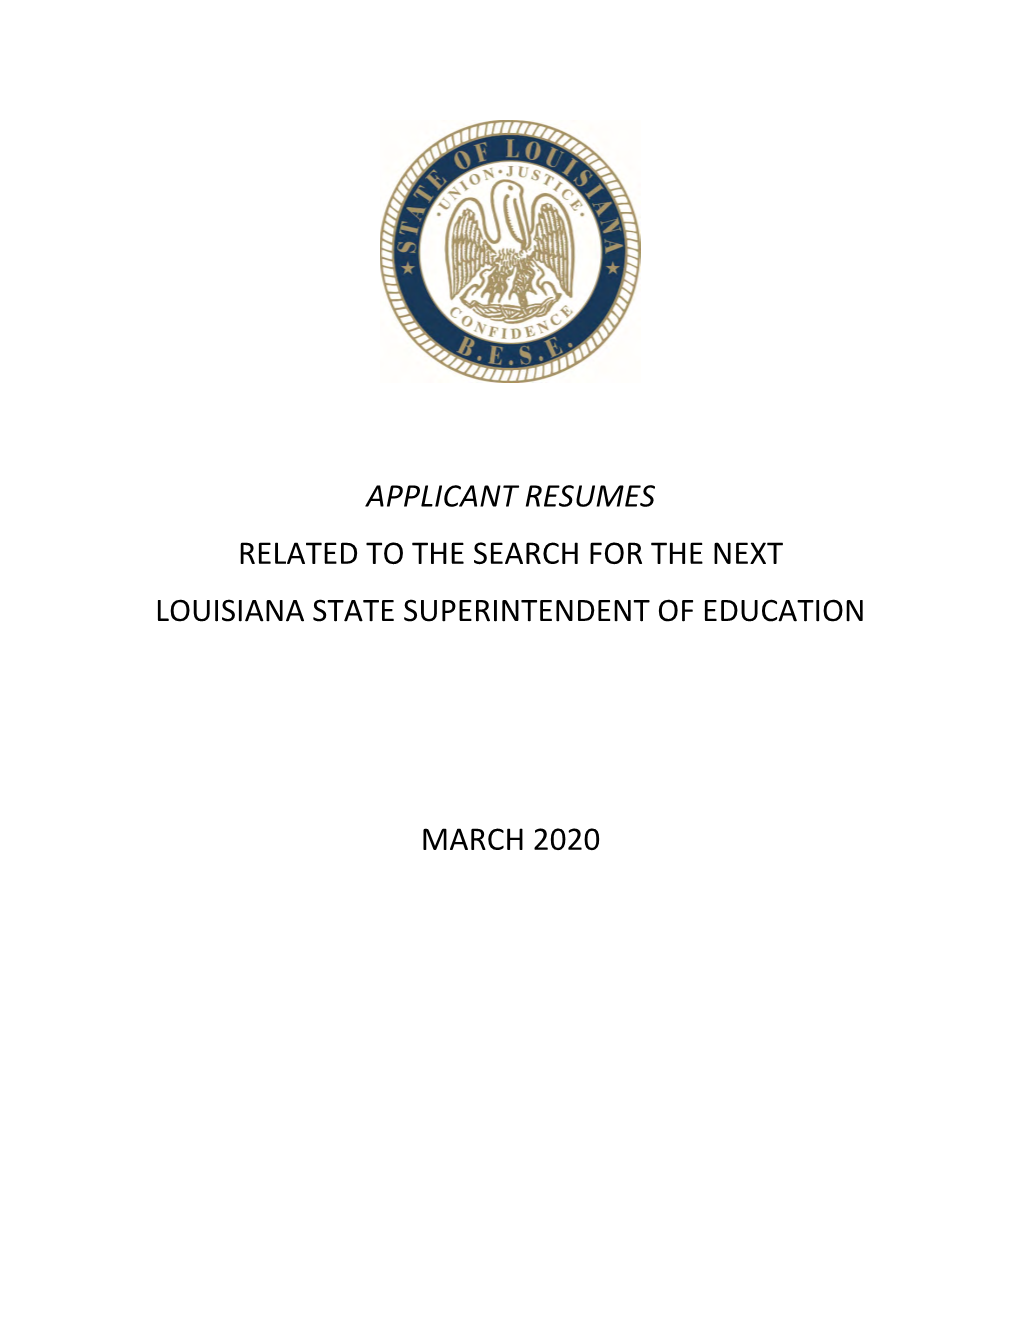 Applicant Resumes Related to the Search for the Next Louisiana State Superintendent of Education